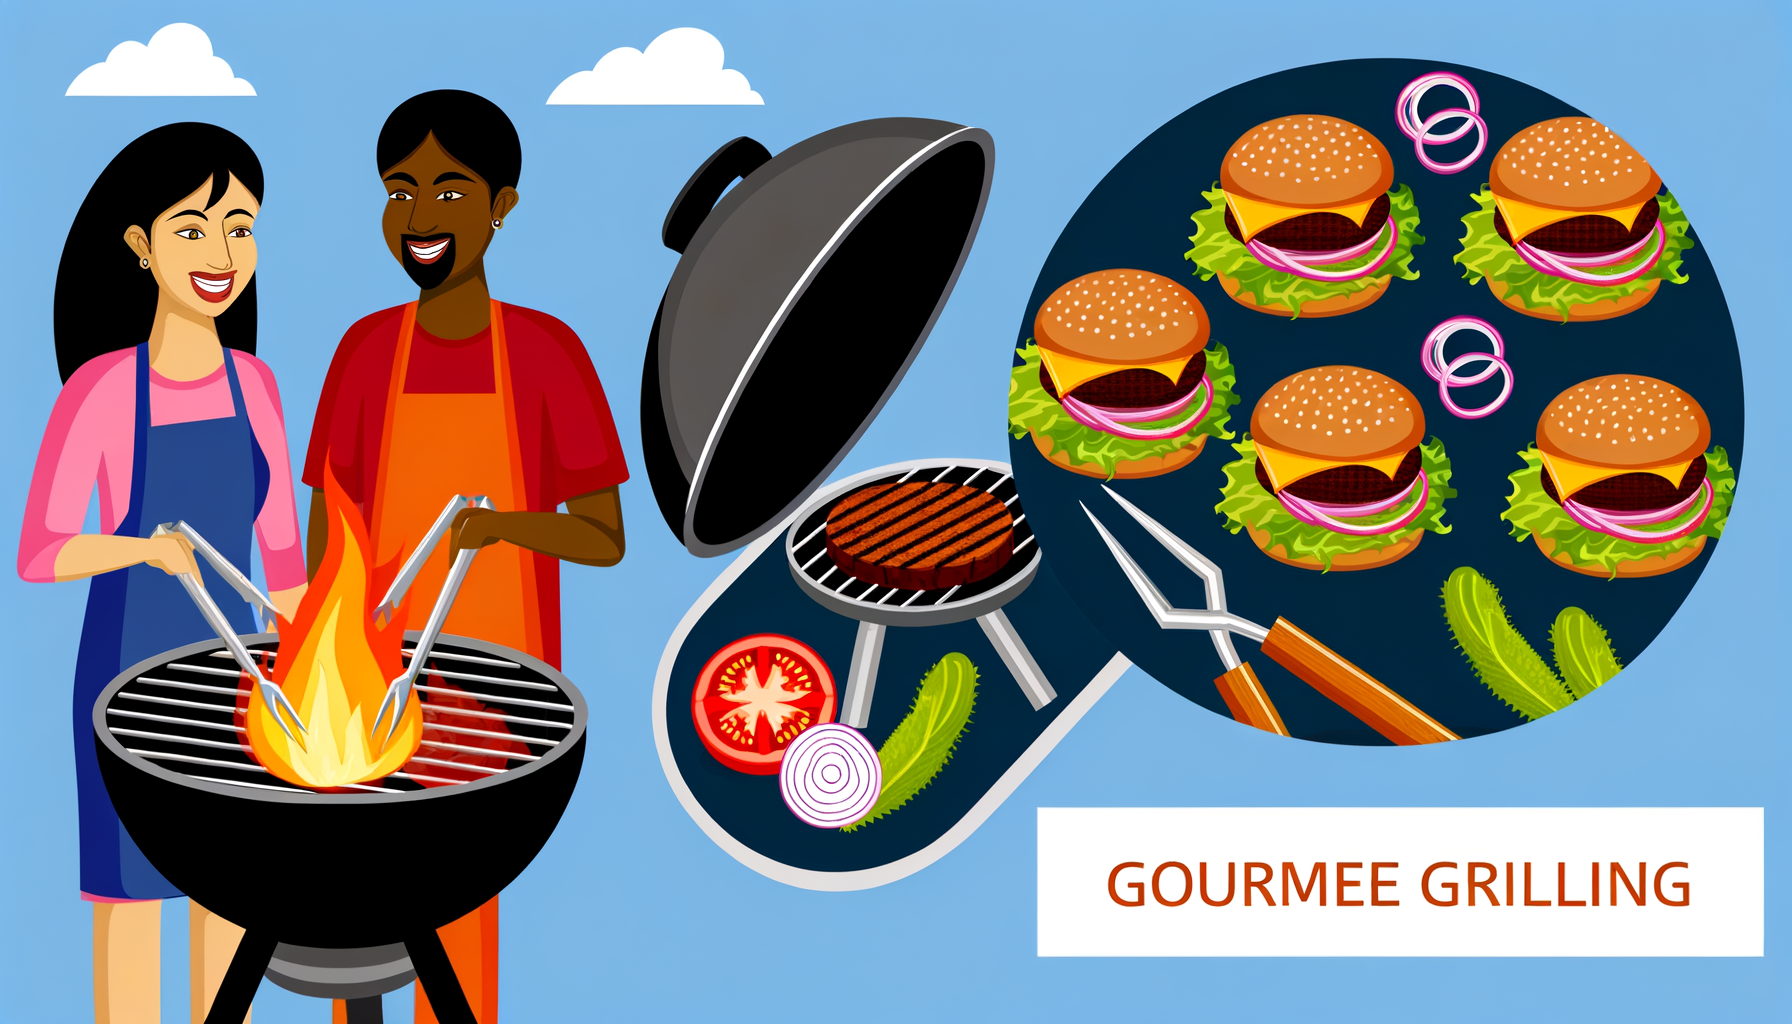 Mouth-watering gourmet burgers with melting cheese on a grill, side garnishes ready, diverse friends engaging in grilling fun.